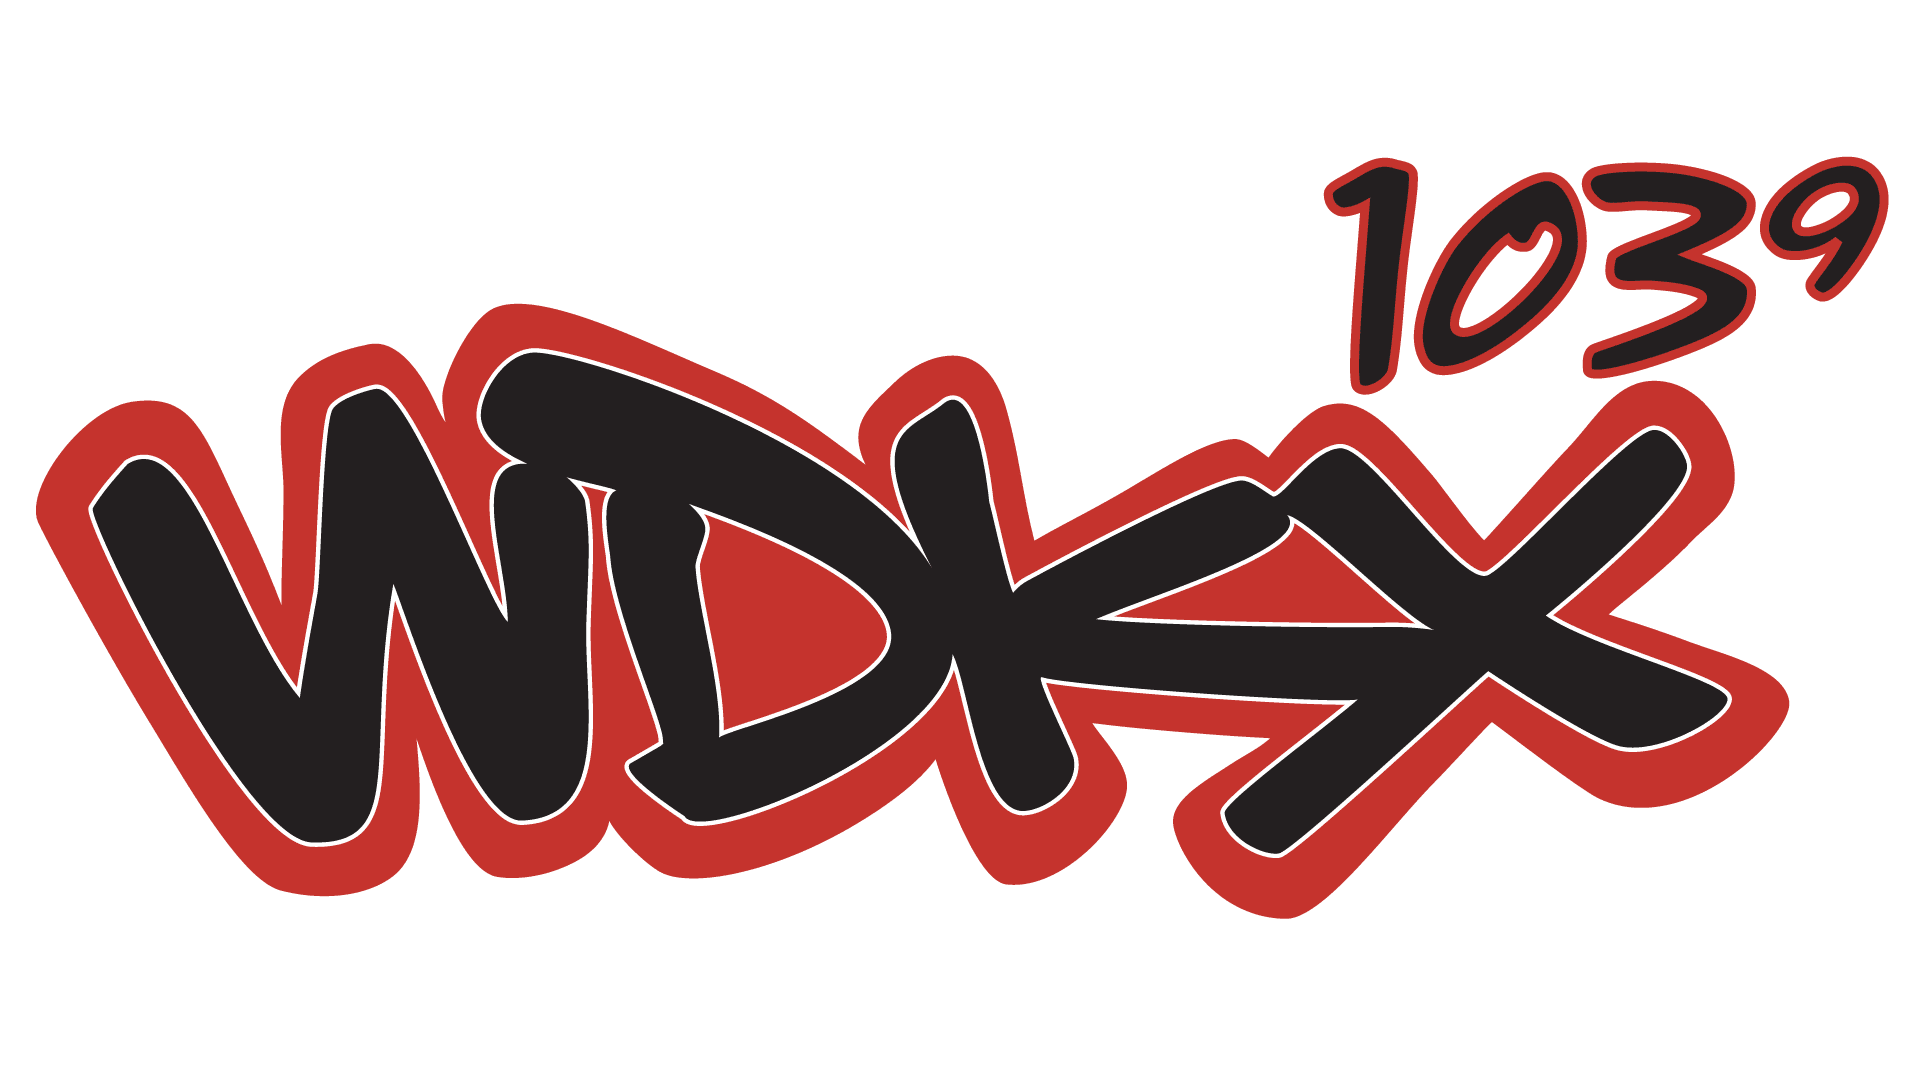 A black and red logo with the word " ndky 1 0 " written in graffiti.